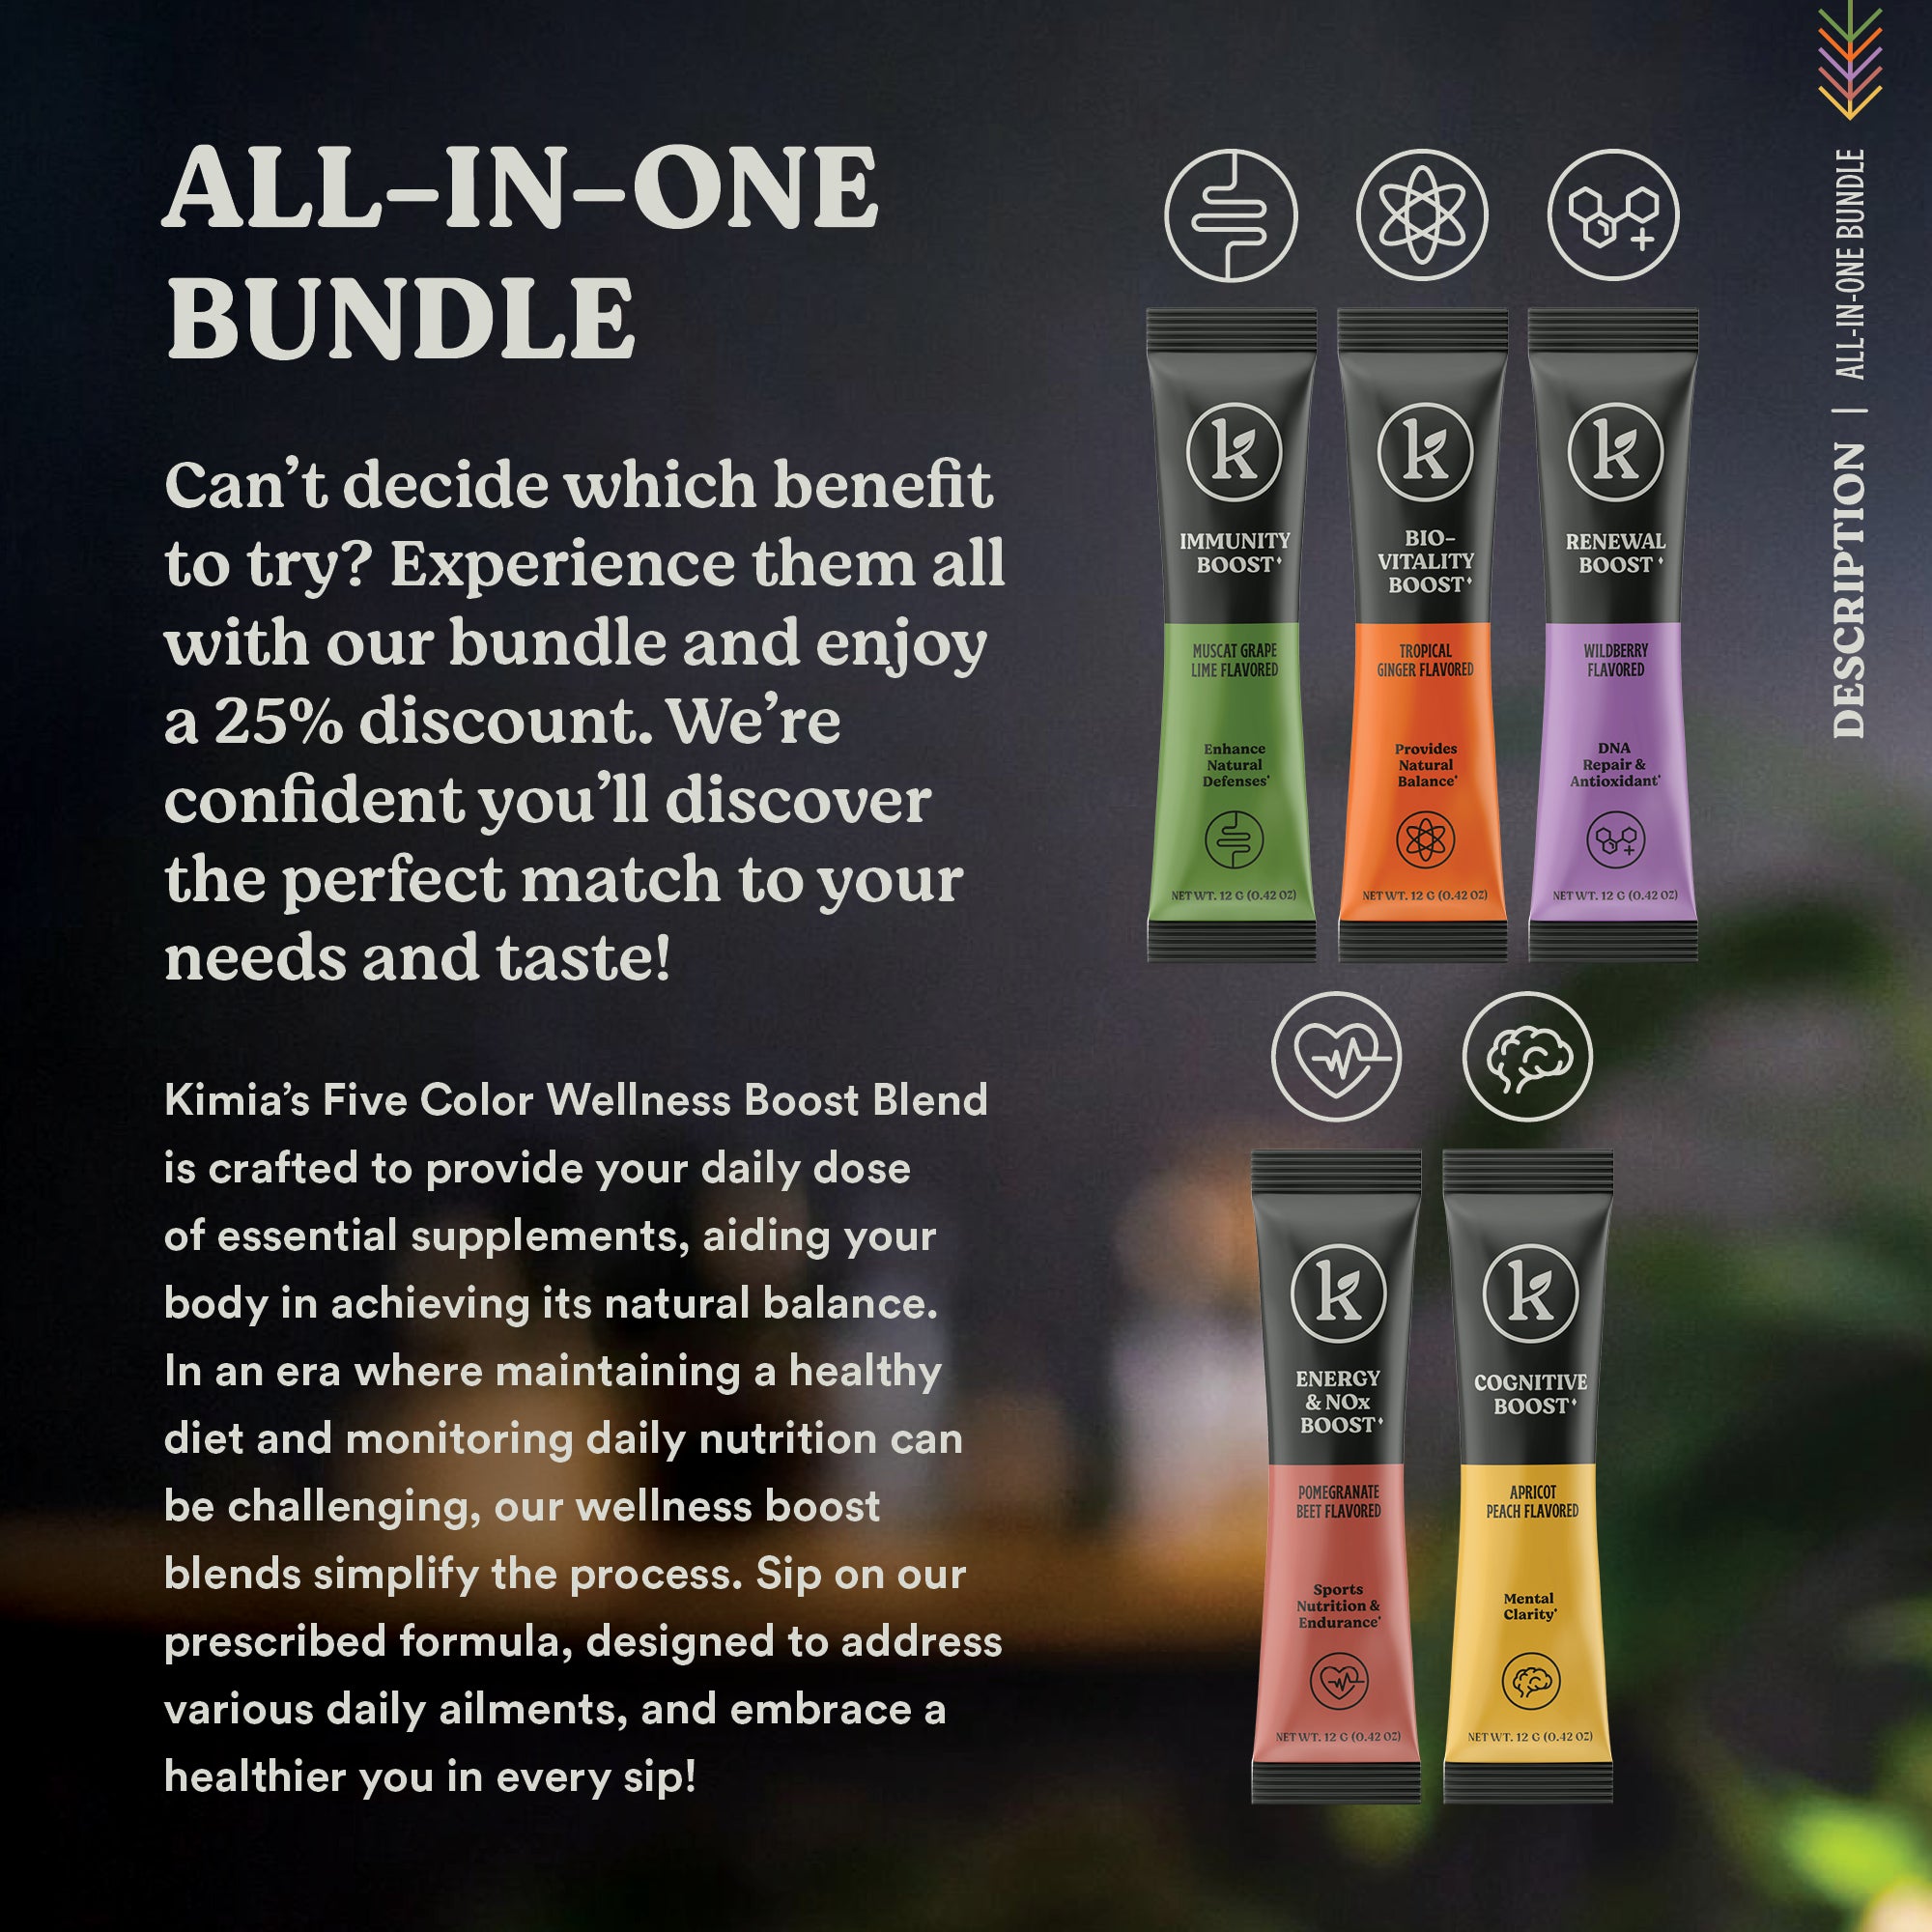 All-in-One Bundle